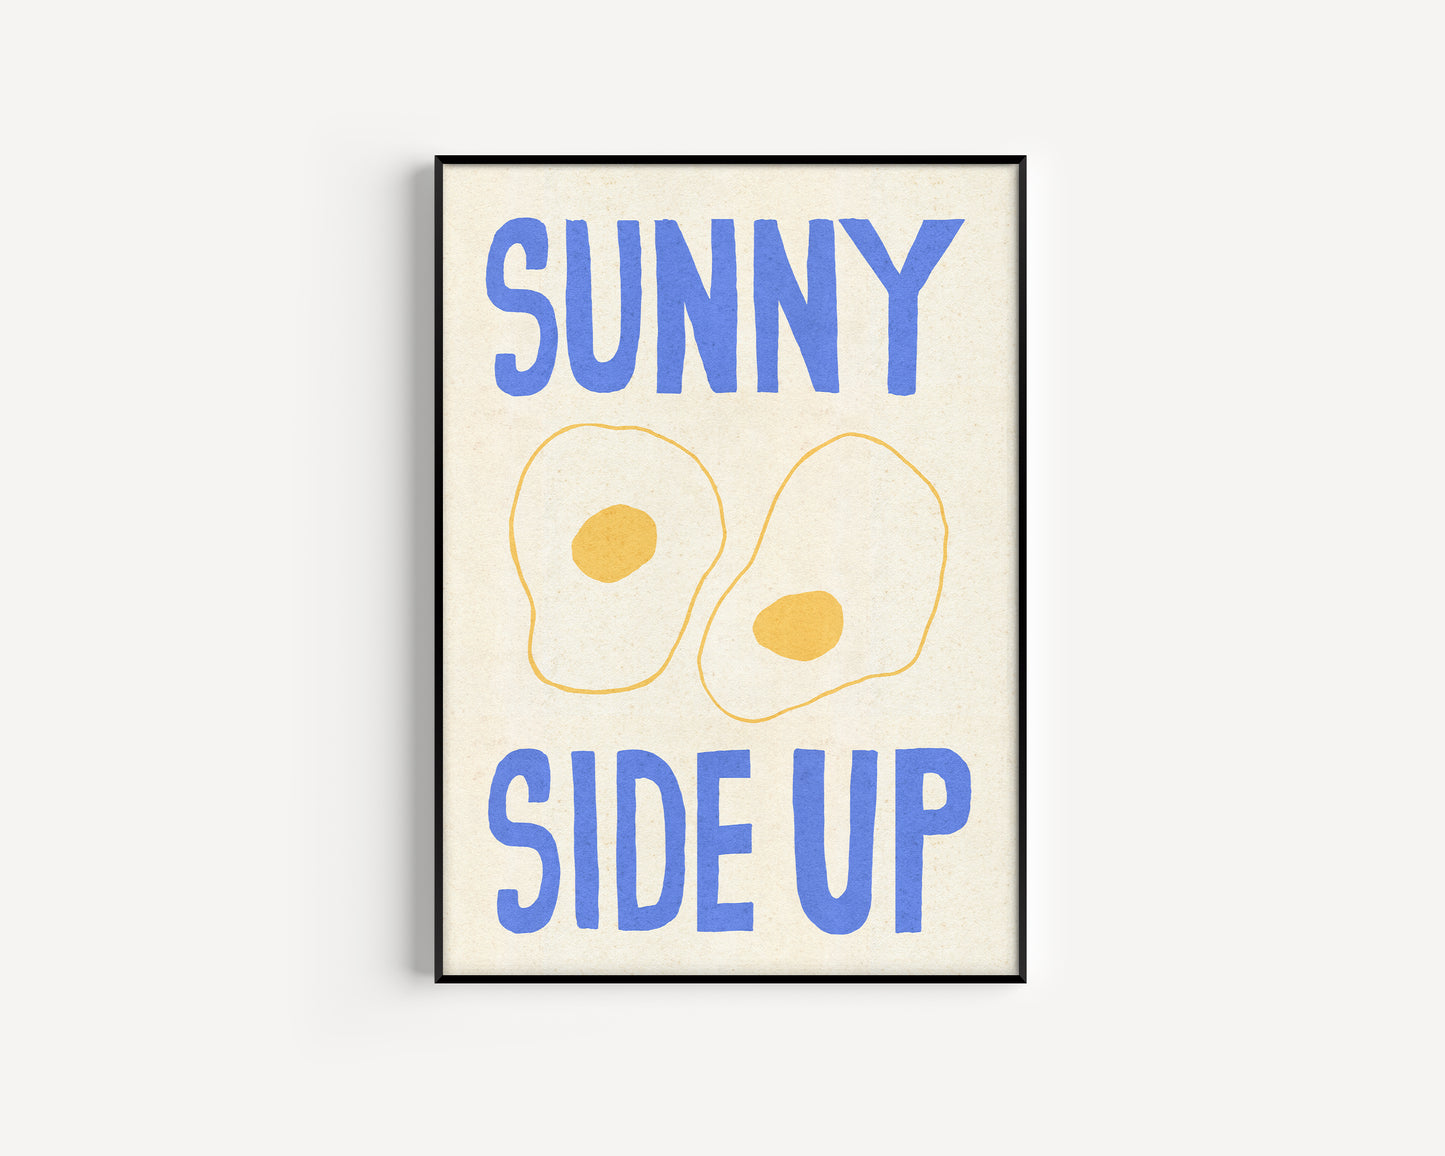 Sunny Side Up Eggs Print